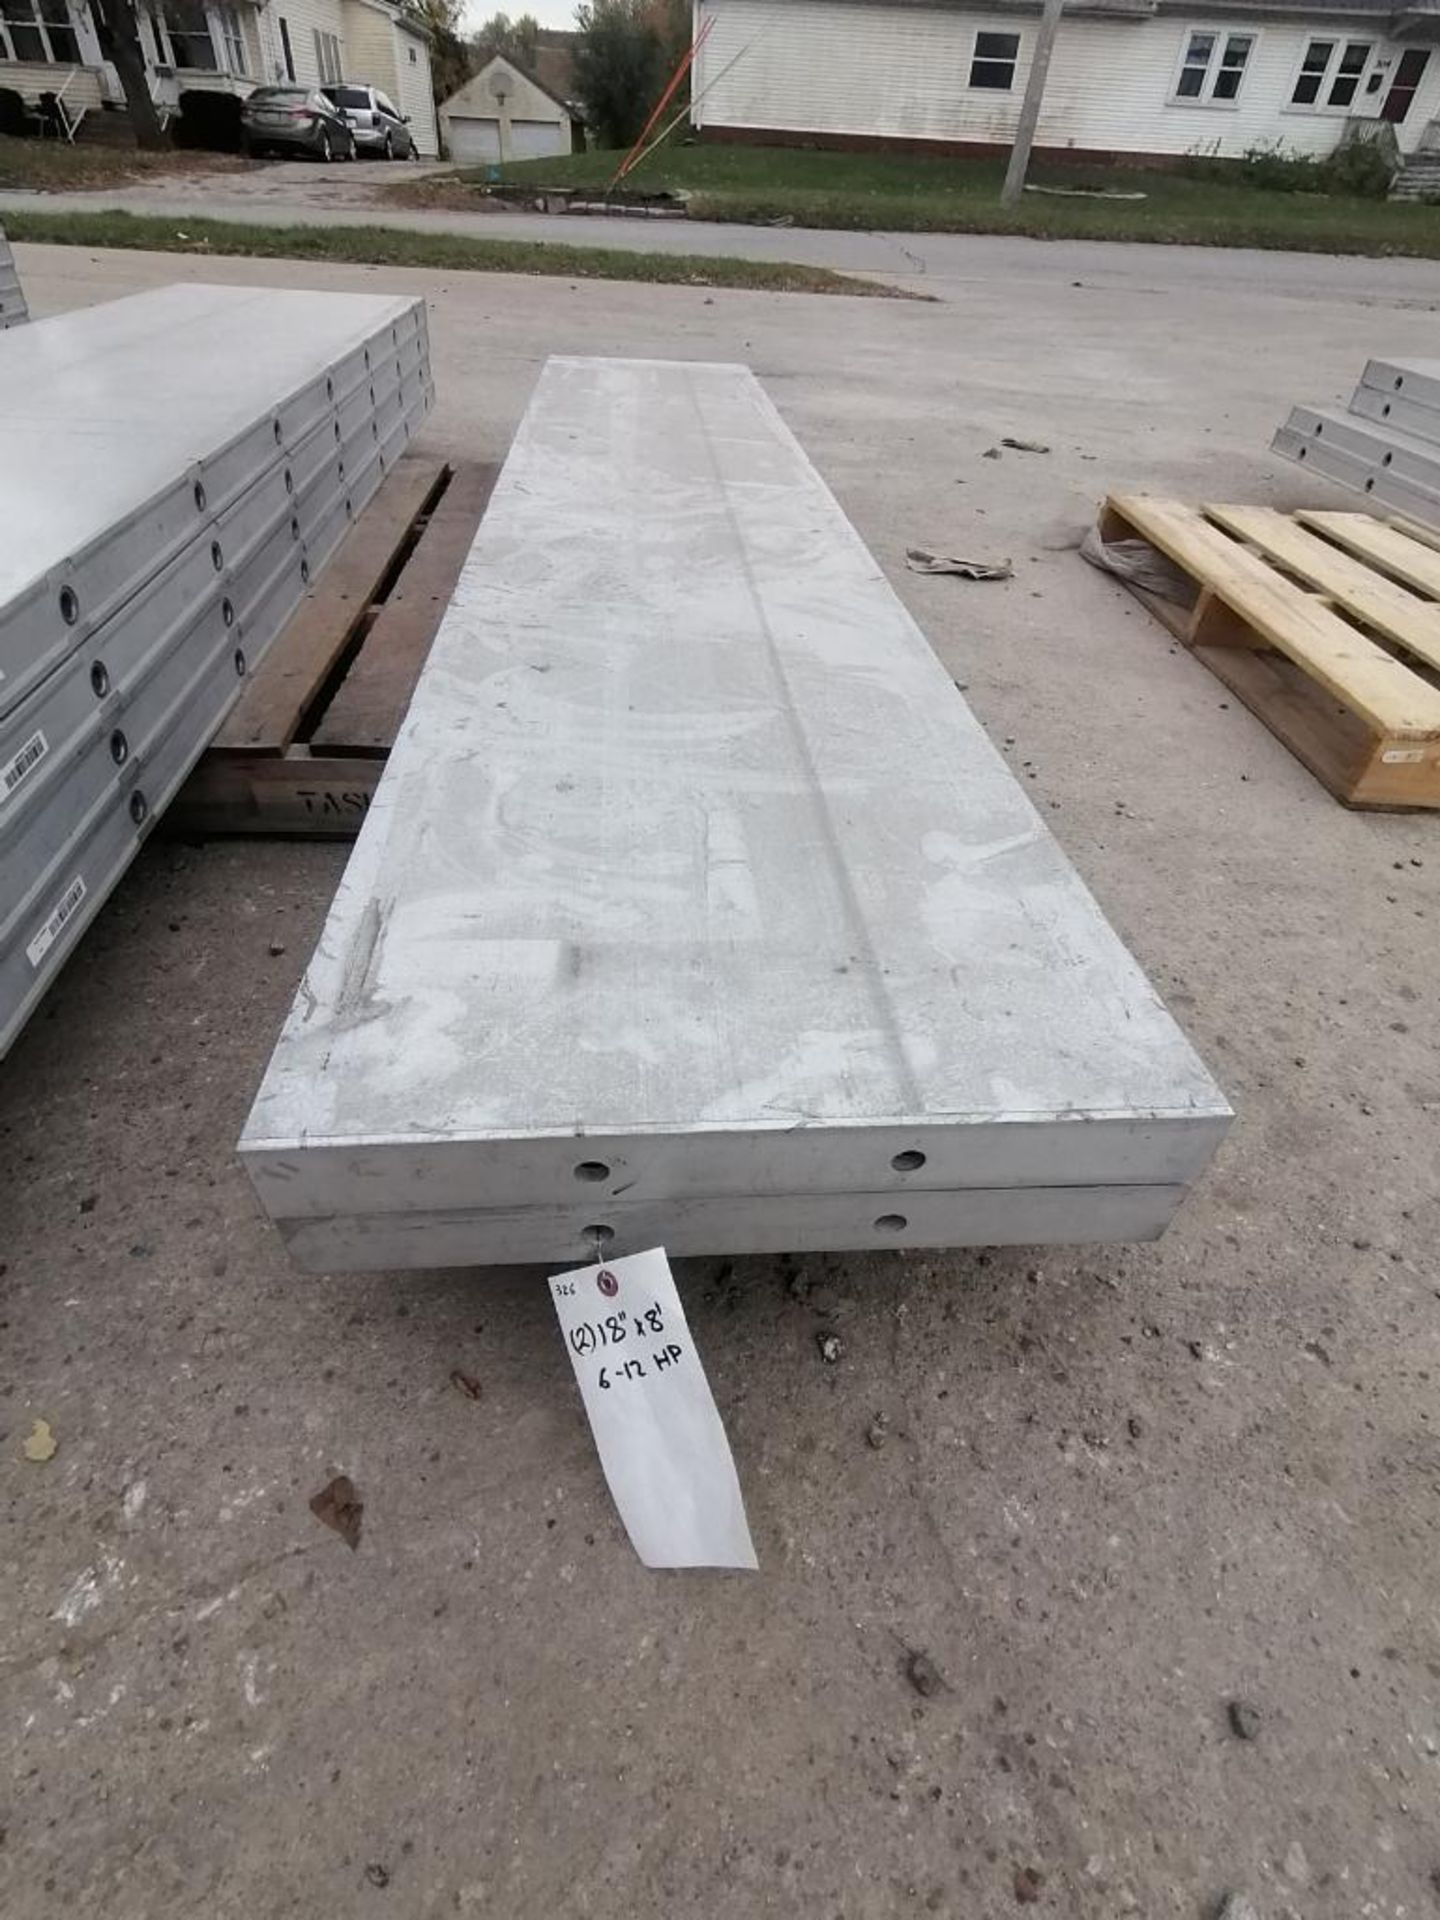 (2) 18" X 8' NEW Badger Smooth Aluminum Concrete Forms 6-12 Hole Pattern. Located in Mt. Pleasant,